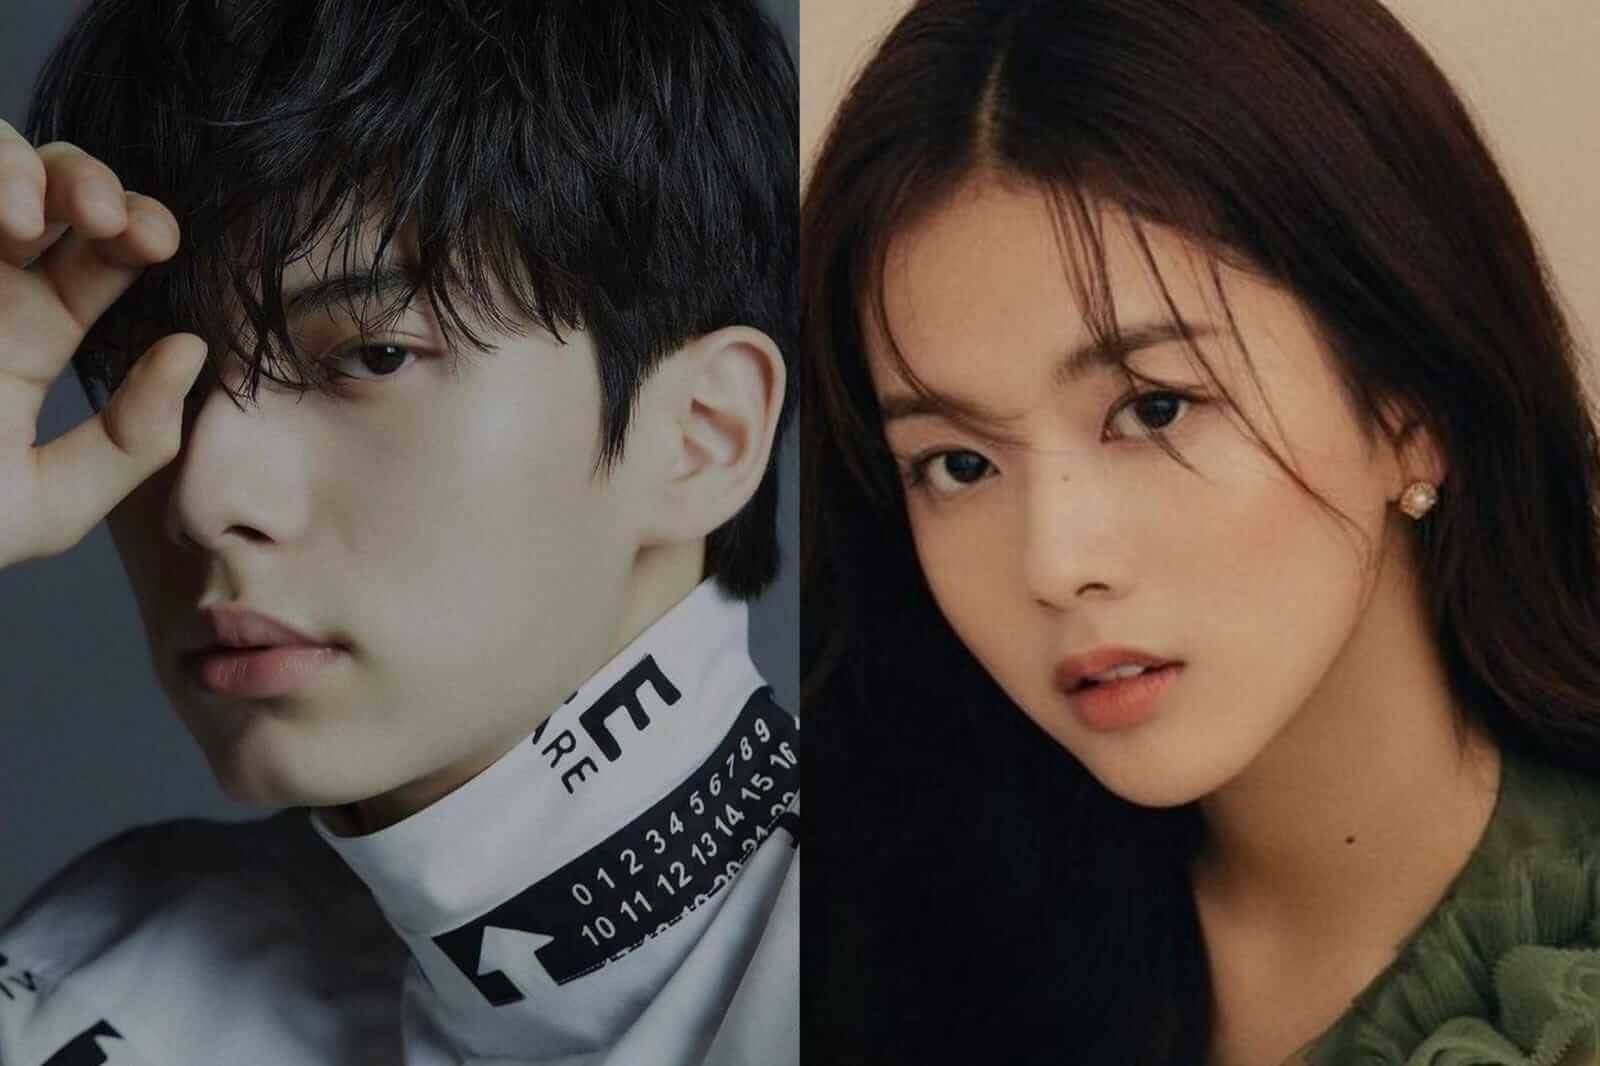 Lee Chae Min along with star Noh Jung Ui is now In Talks To feature In High-Teen netflix serial Hierarchy